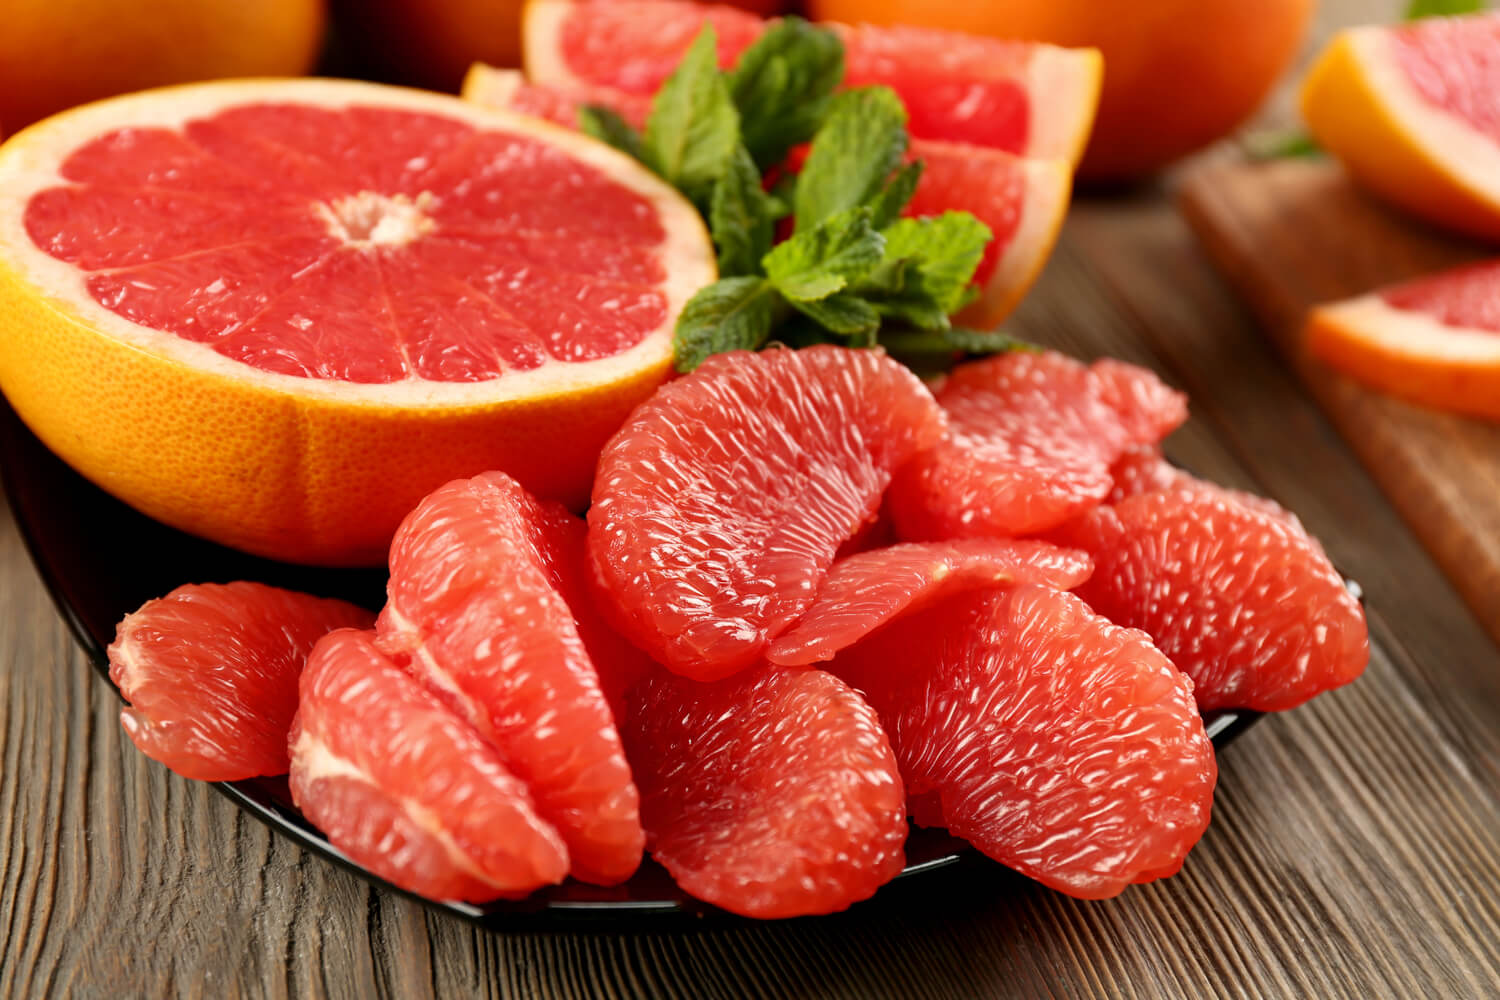 How To Store Cut Grapefruit